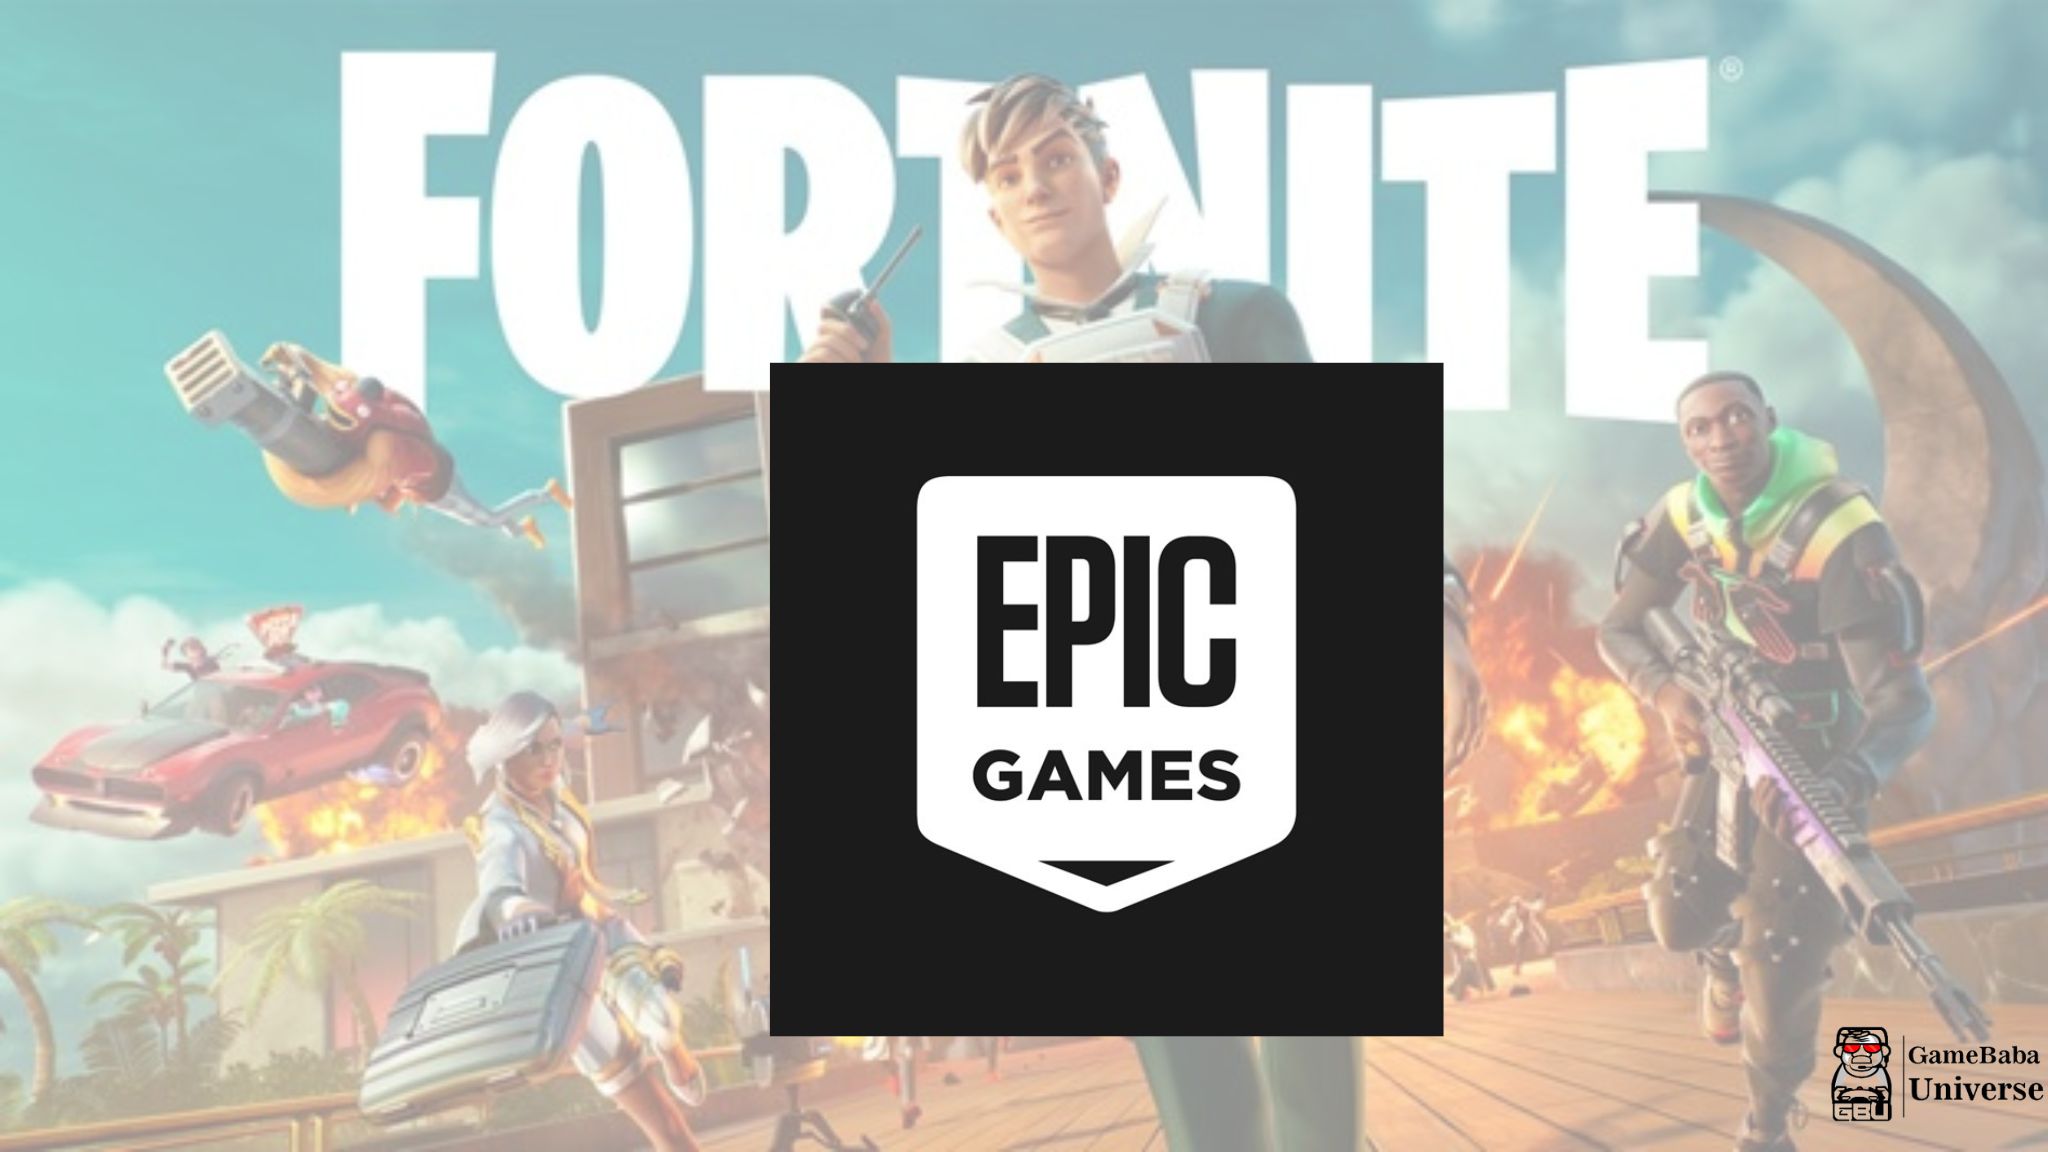 Parents Of Fortnite Gamers In The U.S. May Be Eligible For Refund